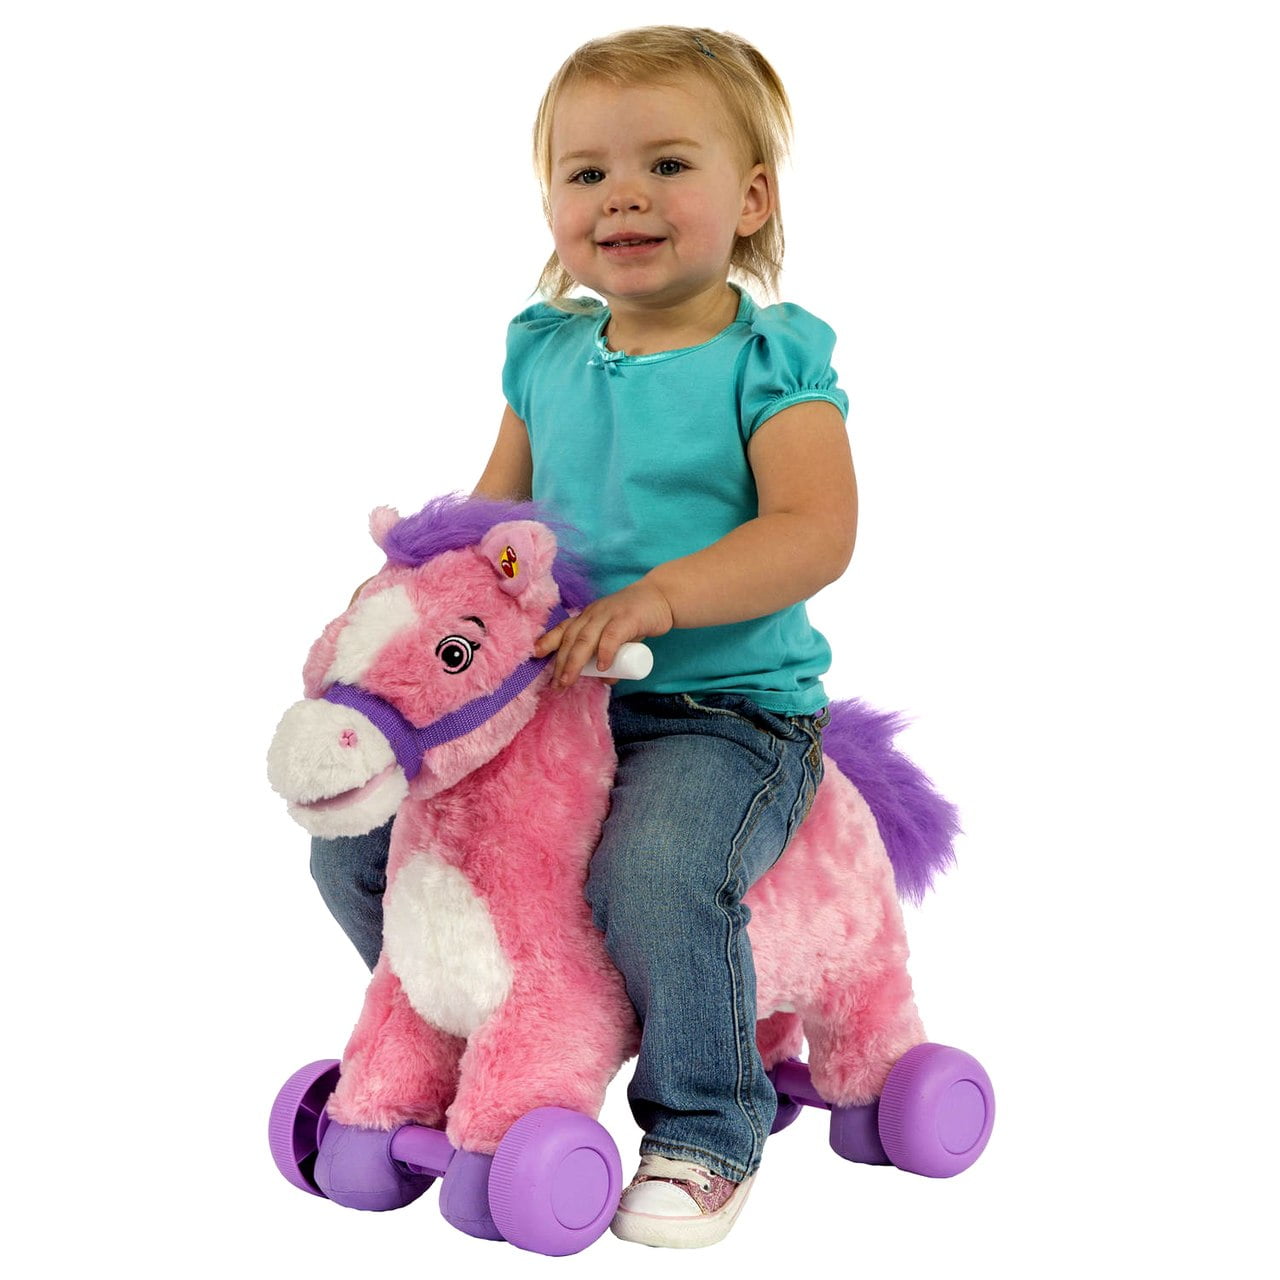 Rockin' Rider Candy 2-in-1 Pony Ride On Toys 3-4 Years Boys Girls Pink Child New 